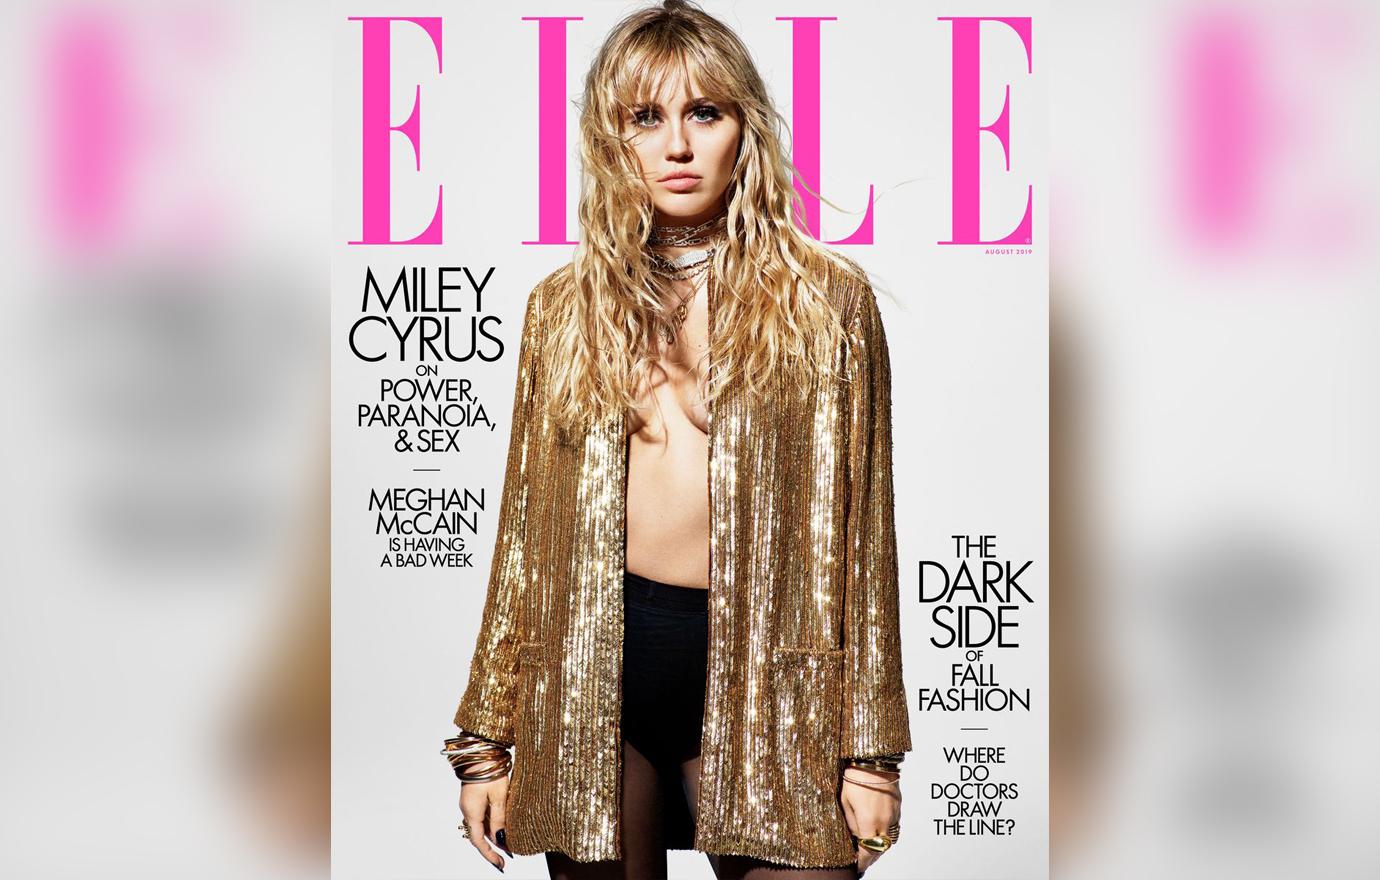 MIley Cyrus Topless Wearing Black Tights and Underwear with an Oversized Sparkly Gold Jacket on the Cover of Elle Magazine